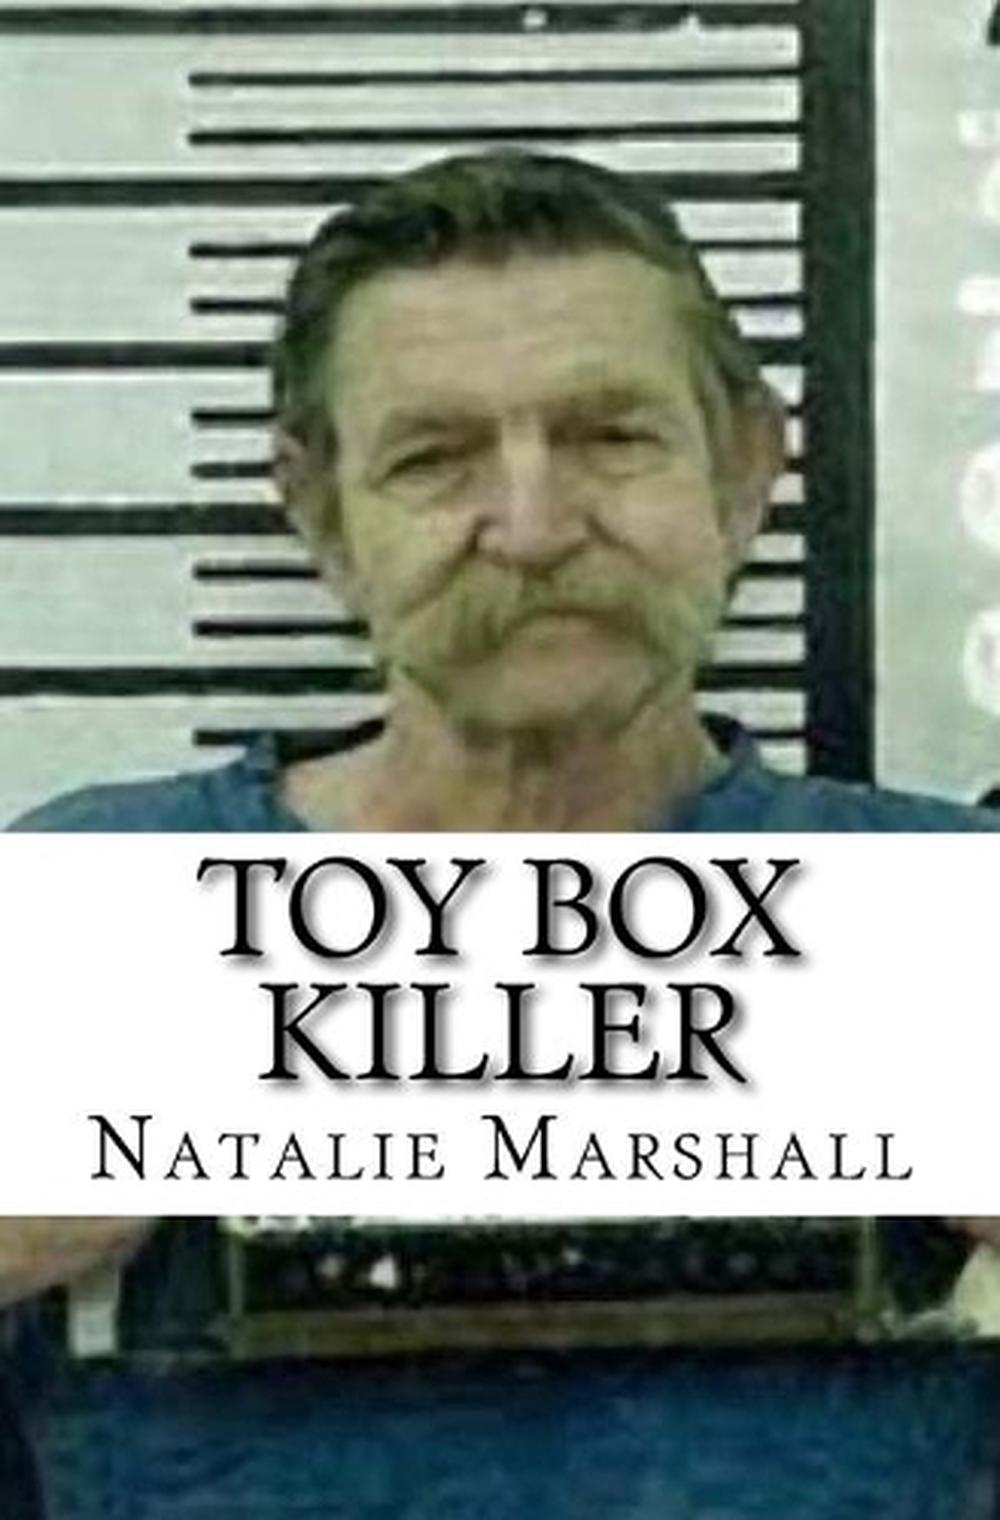 Toy Box Killer by Natalie Marshall (English) Paperback Book Free